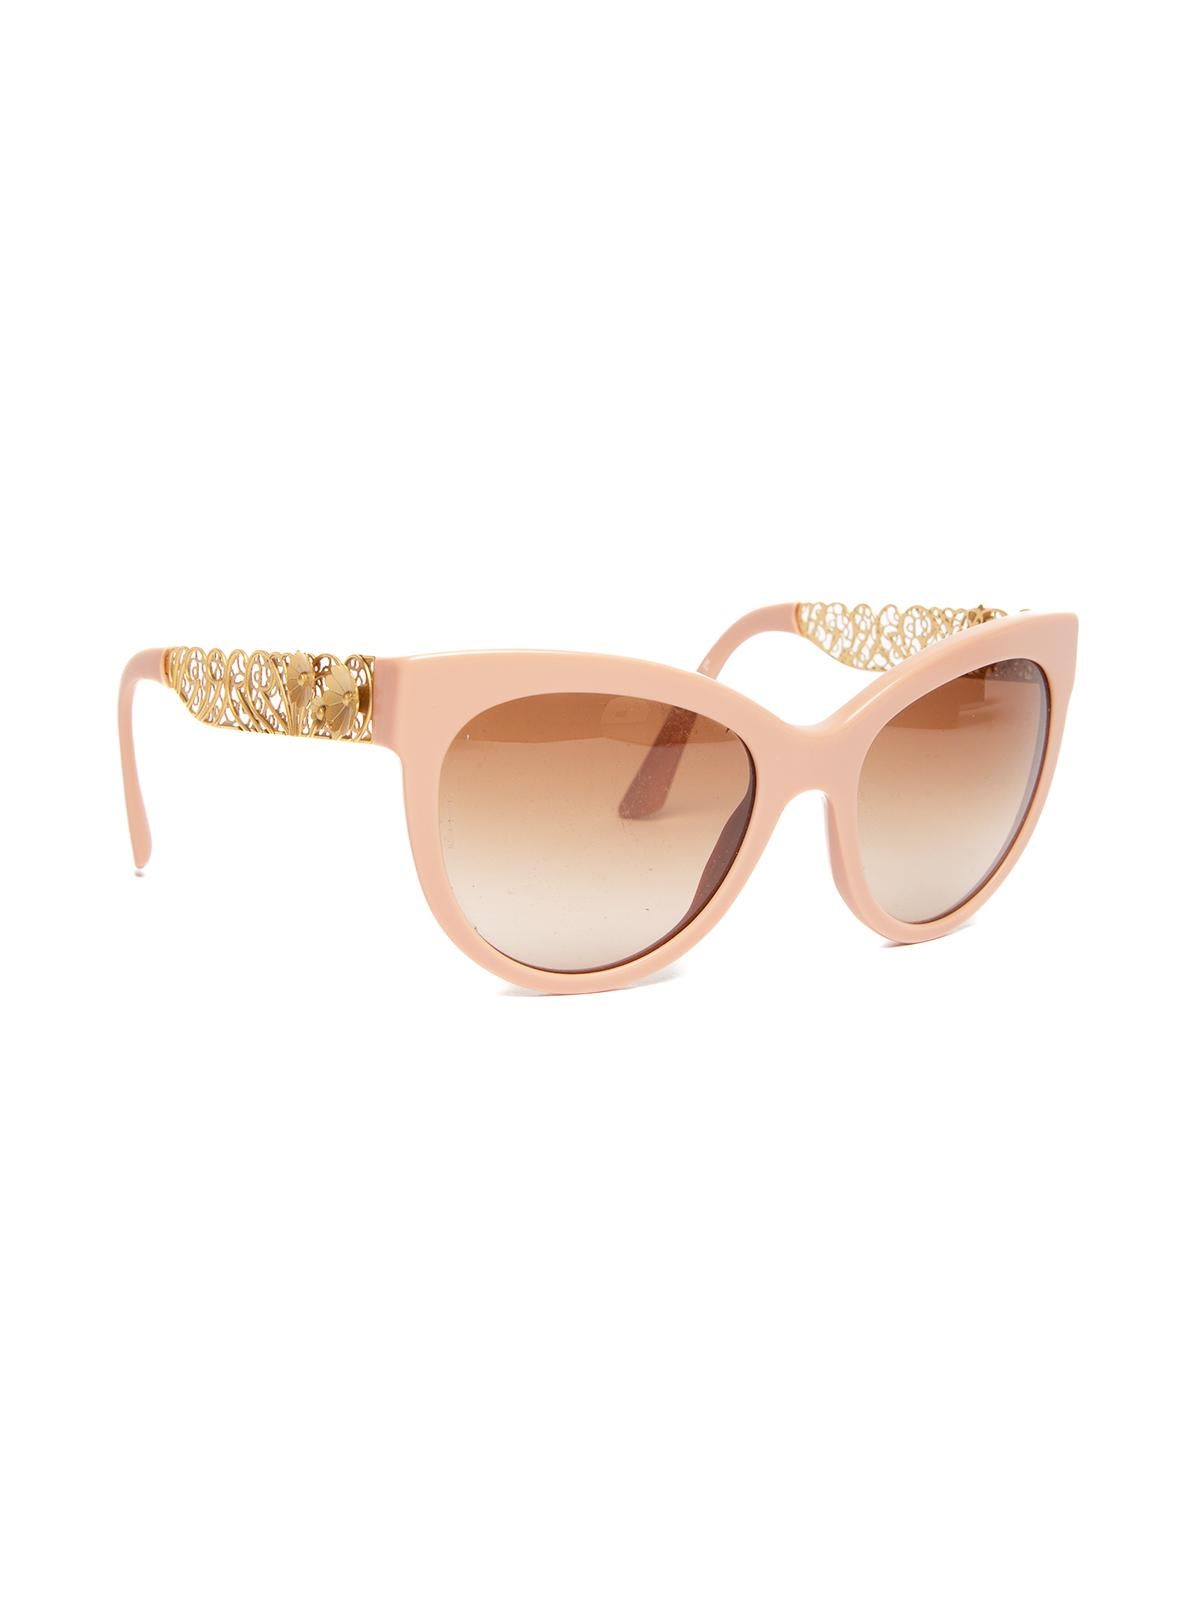 CONDITION is Very good. Minimal wear to sunglasses is evident. Rarely visible scratches to lenses on this used Dolce & Gabanna designer resale item. Details Pink & Gold Plastic & Metal Gold metal rose embroidery on arms Logo stamp embellished on